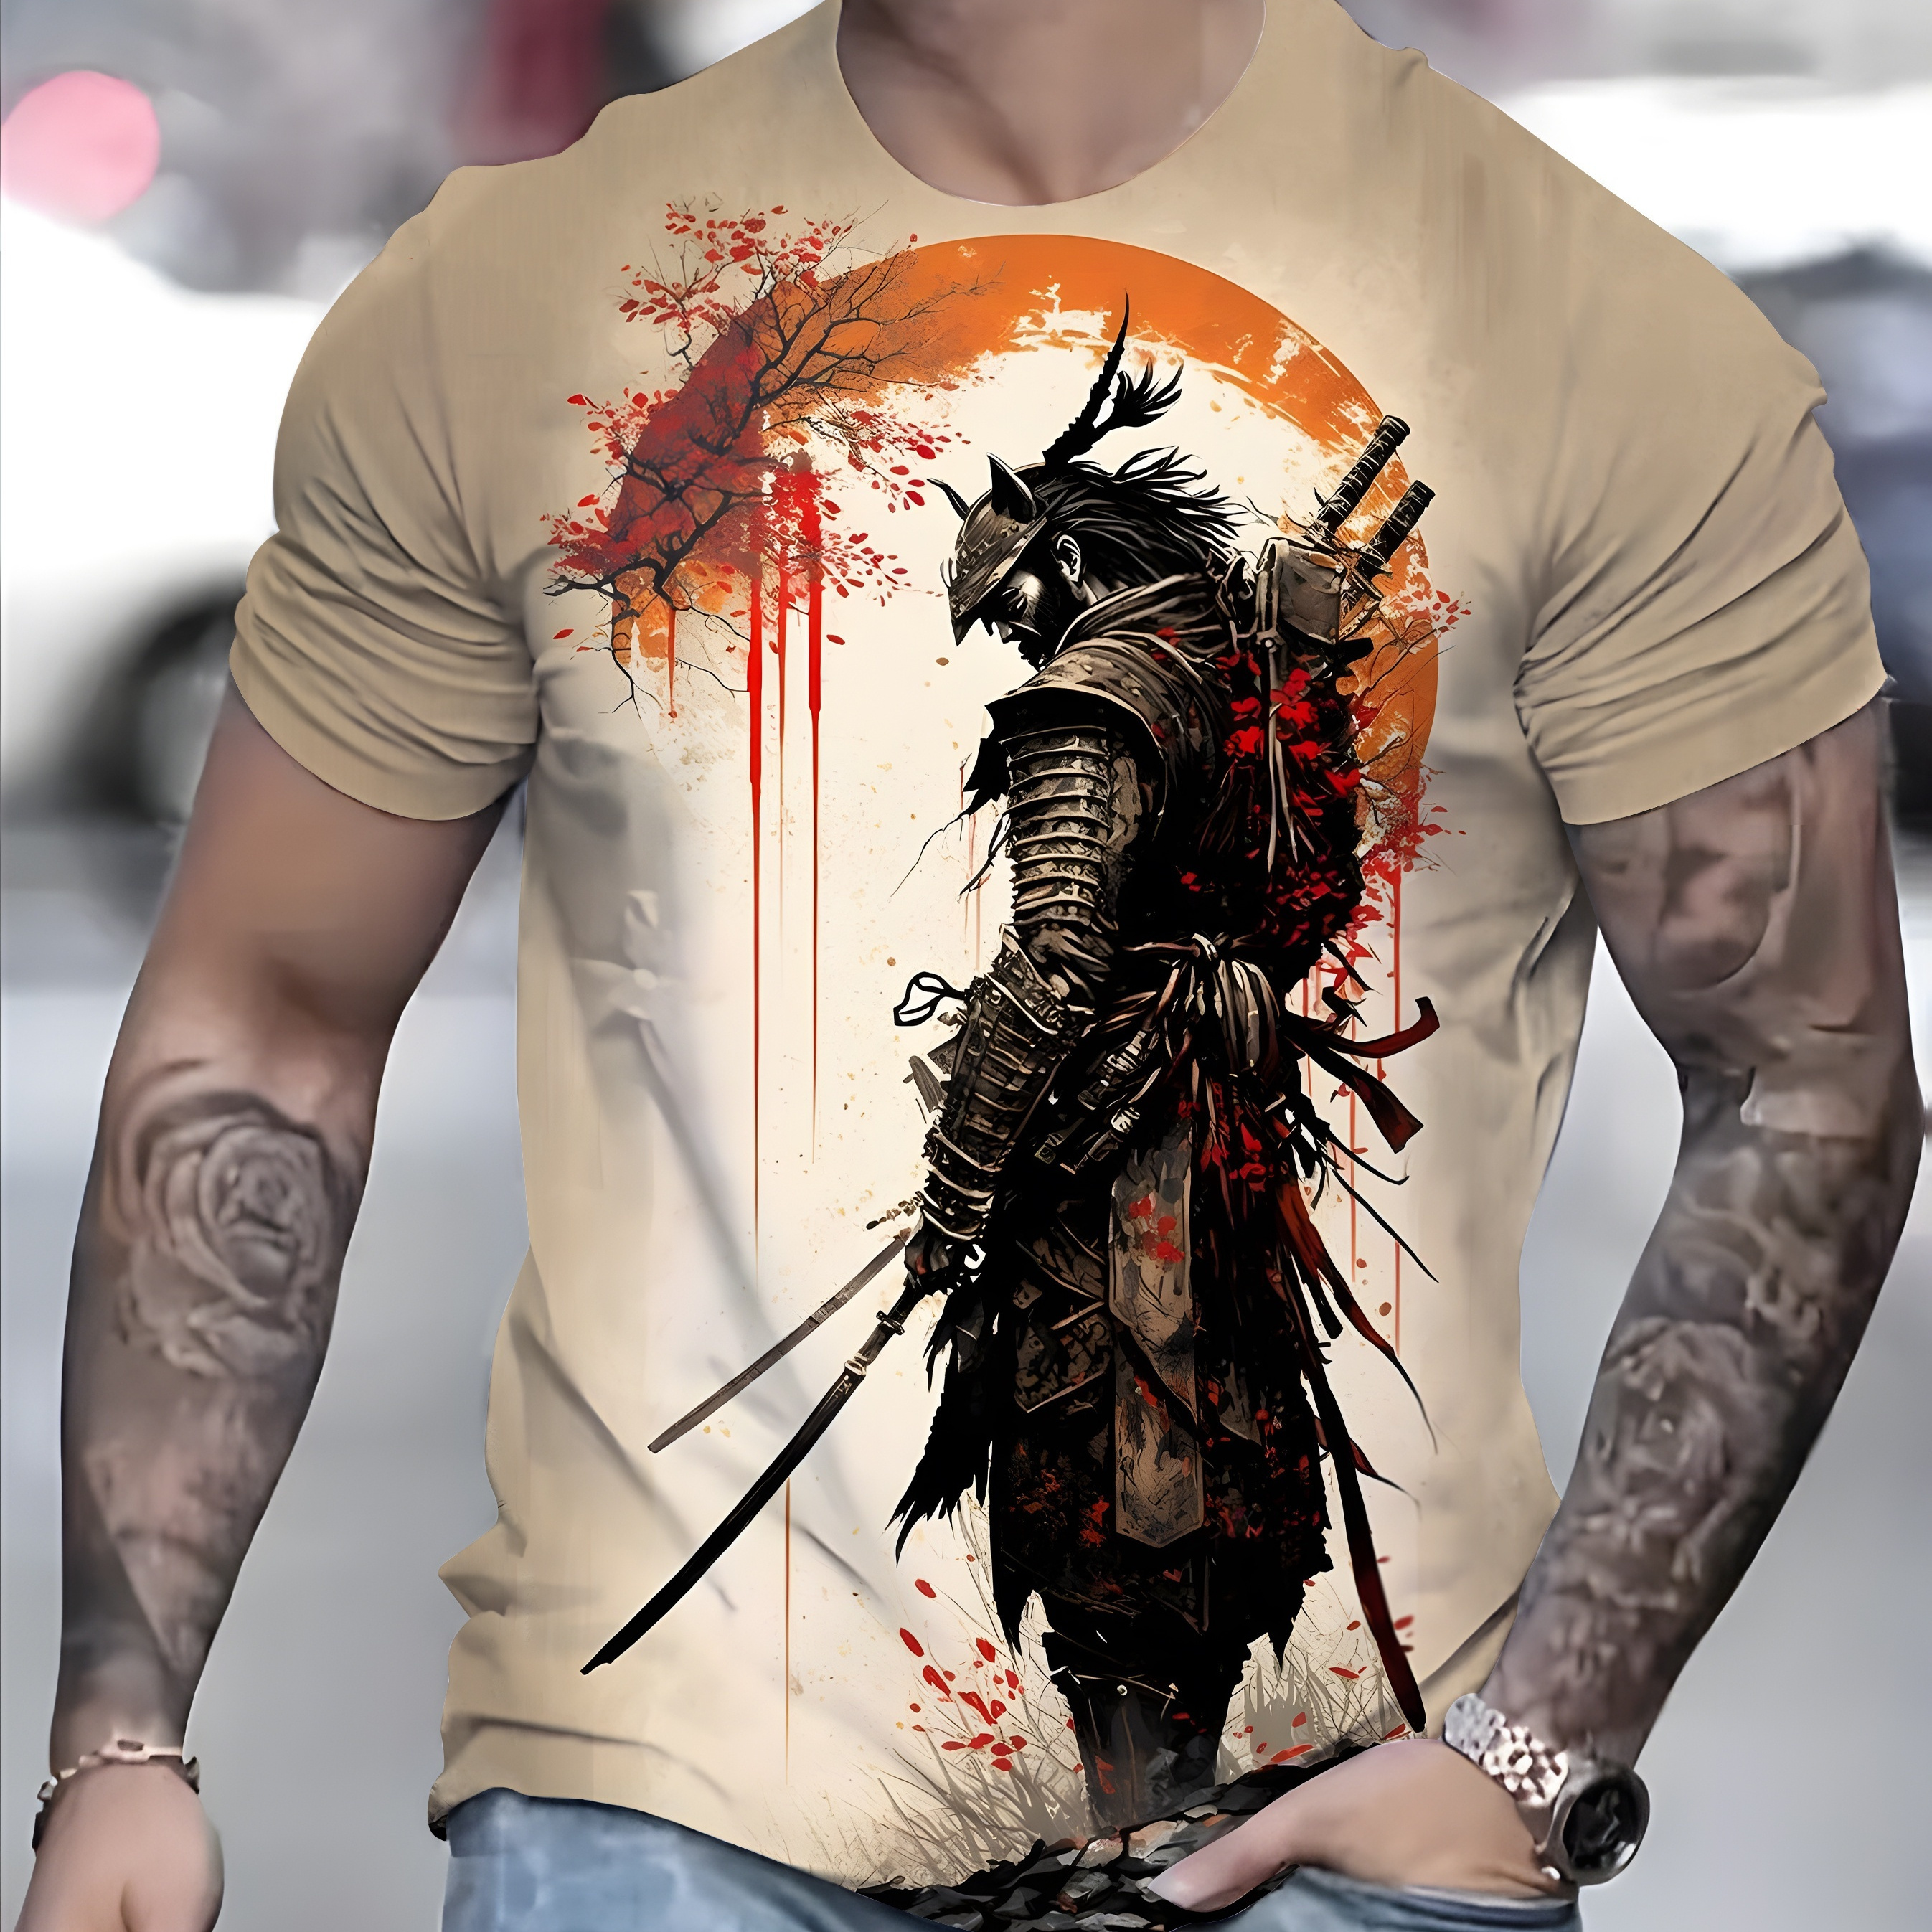 

Anime Style Samurai Pattern 3d Printed Crew Neck Short Sleeve T-shirt For Men, Casual Summer T-shirt For Daily Wear And Vacation Resorts